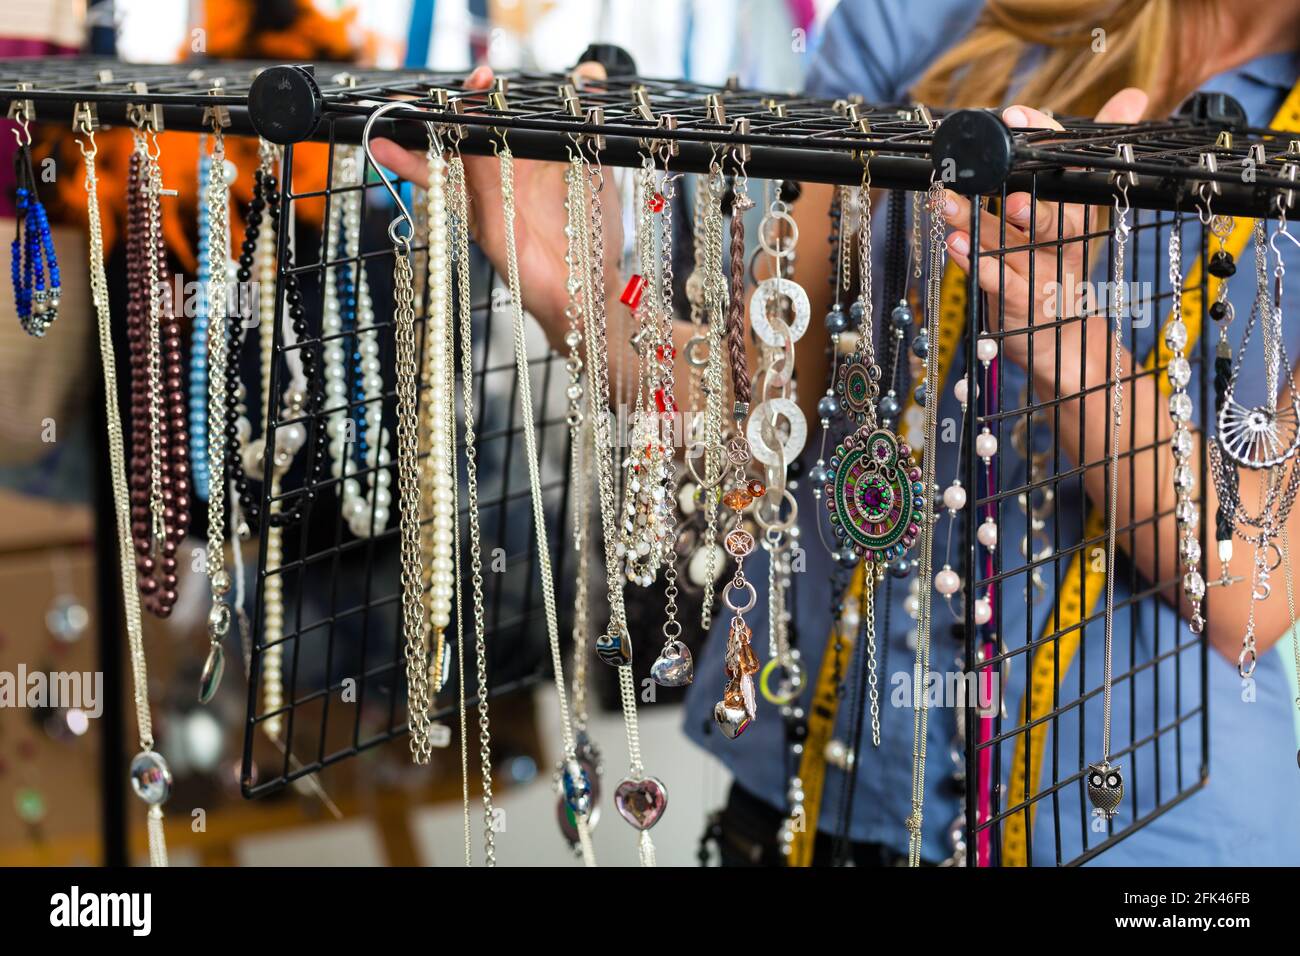 Freelance - jewelry designer working on a draft, different pieces of jewelry hanging in front Stock Photo